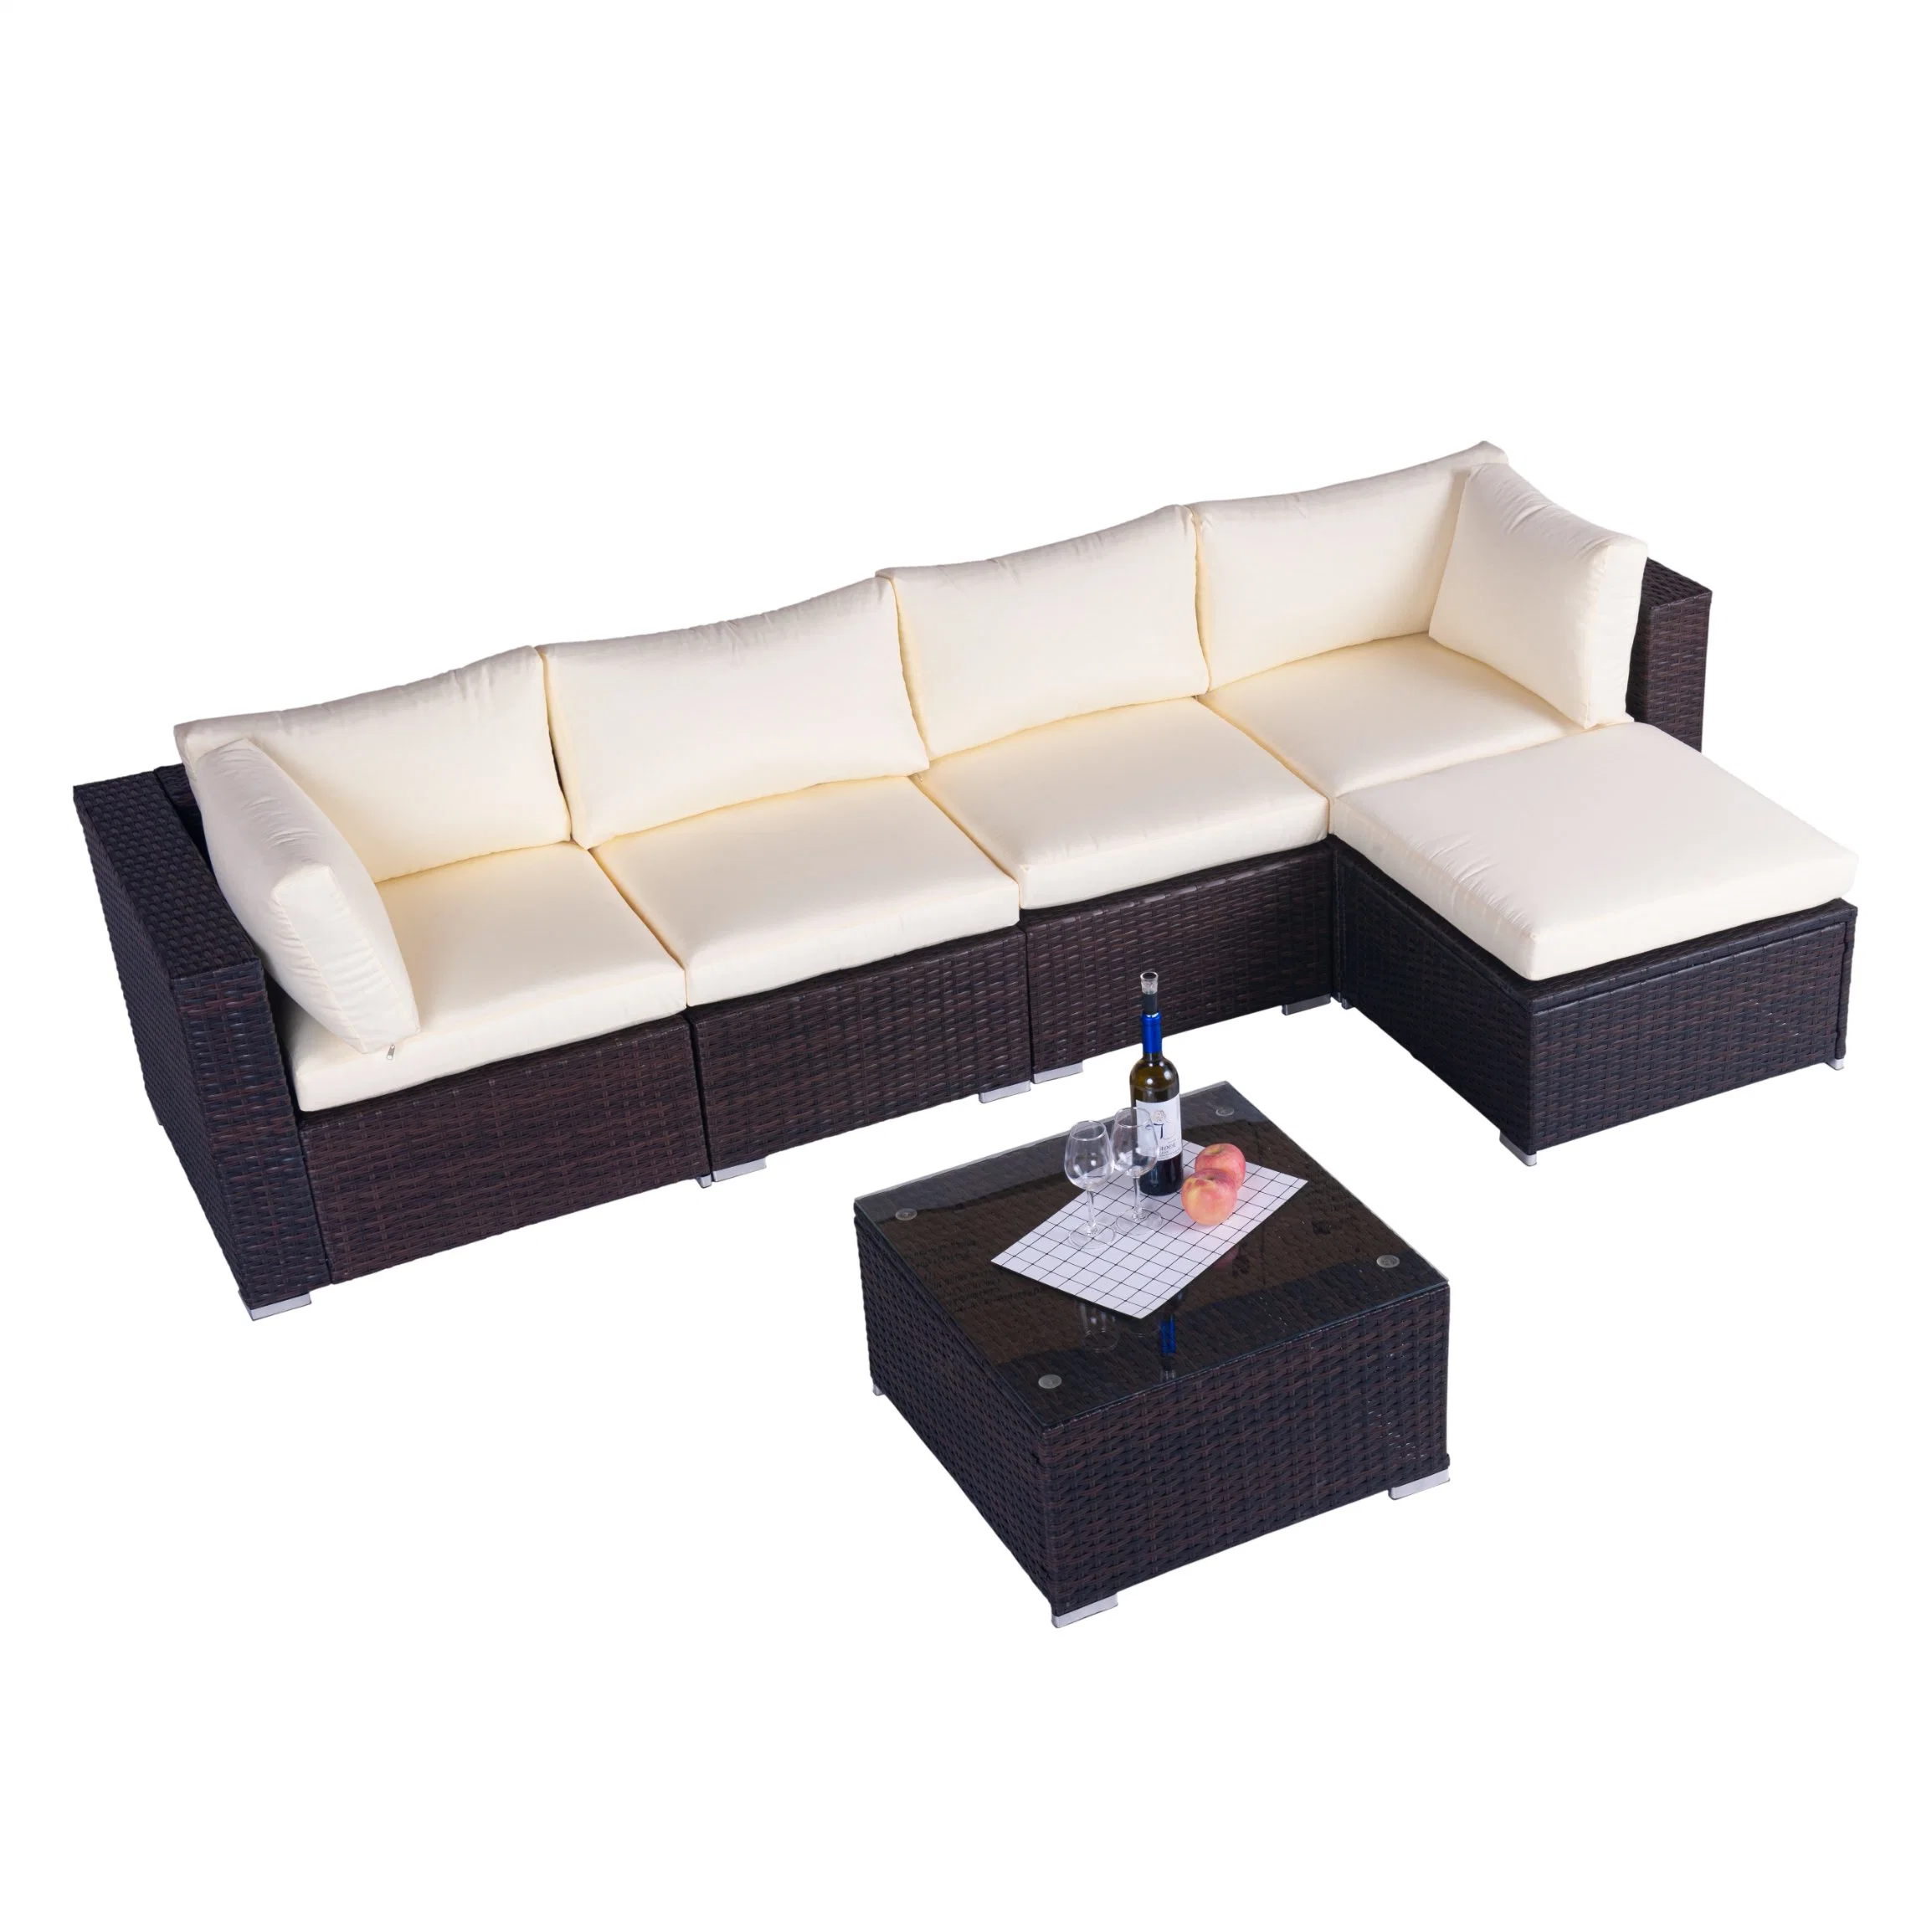 Hot Sell Outdoor Furniture Modern Garden Sets for Hotel Patio Sofa Patio Furniture